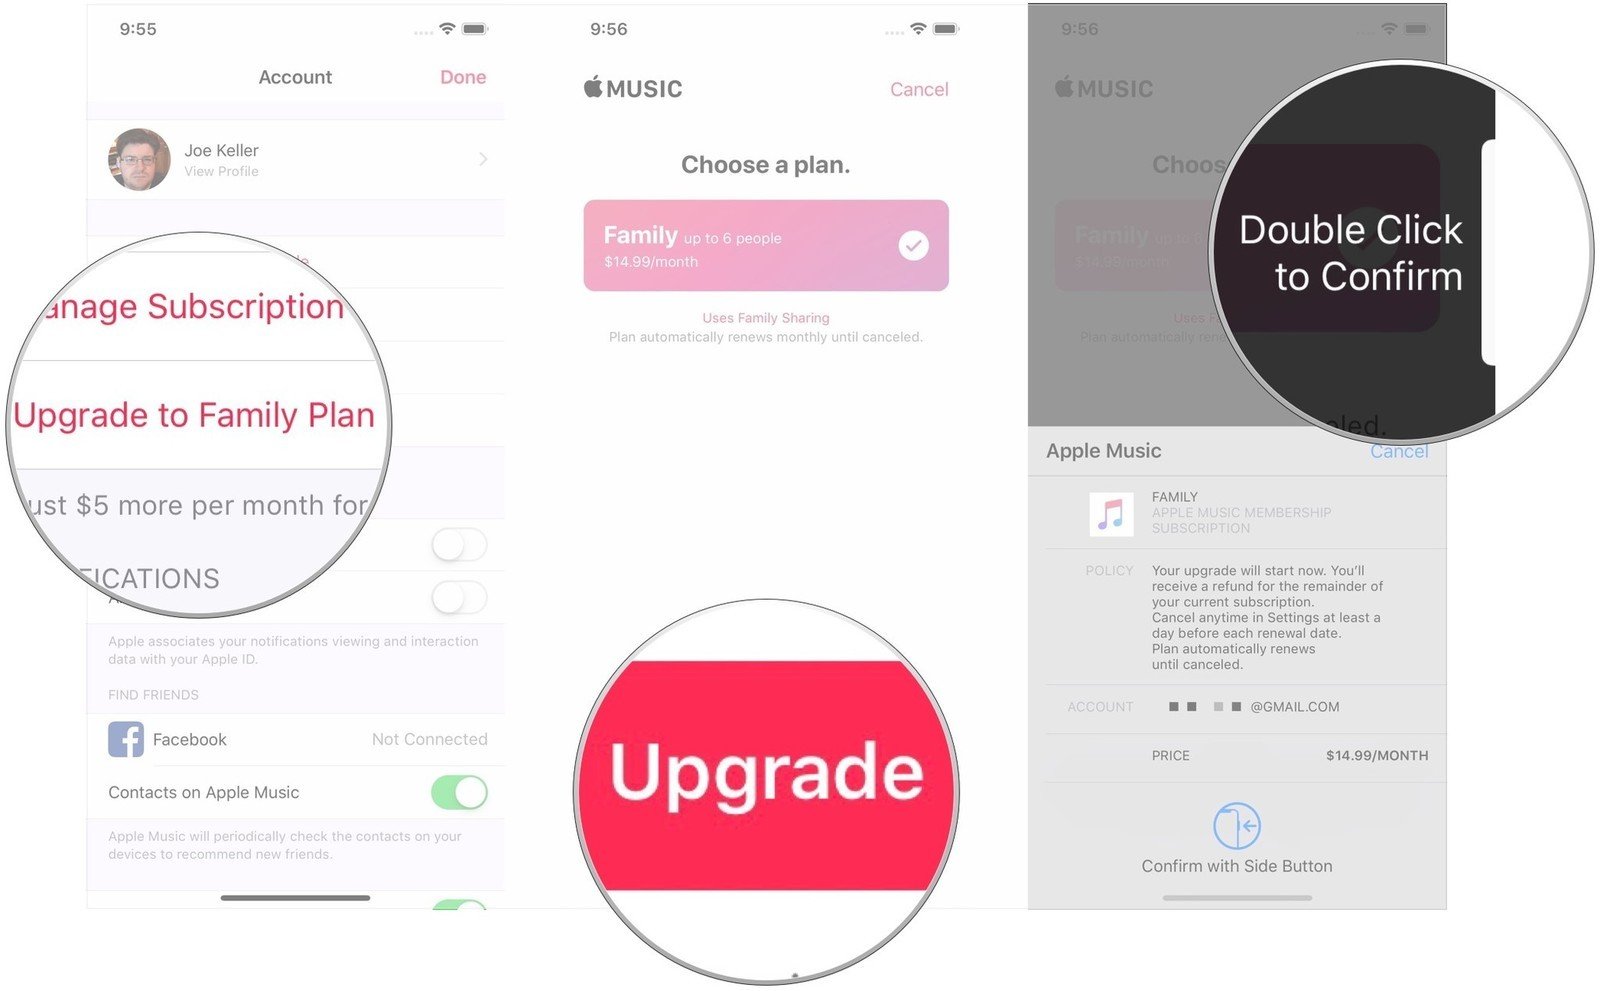 Move from indiviudal Apple Music plan to Family Plan on iPhone by showing: Tap Upgrade to Family Plan, tap Upgrade, cofirm purchase